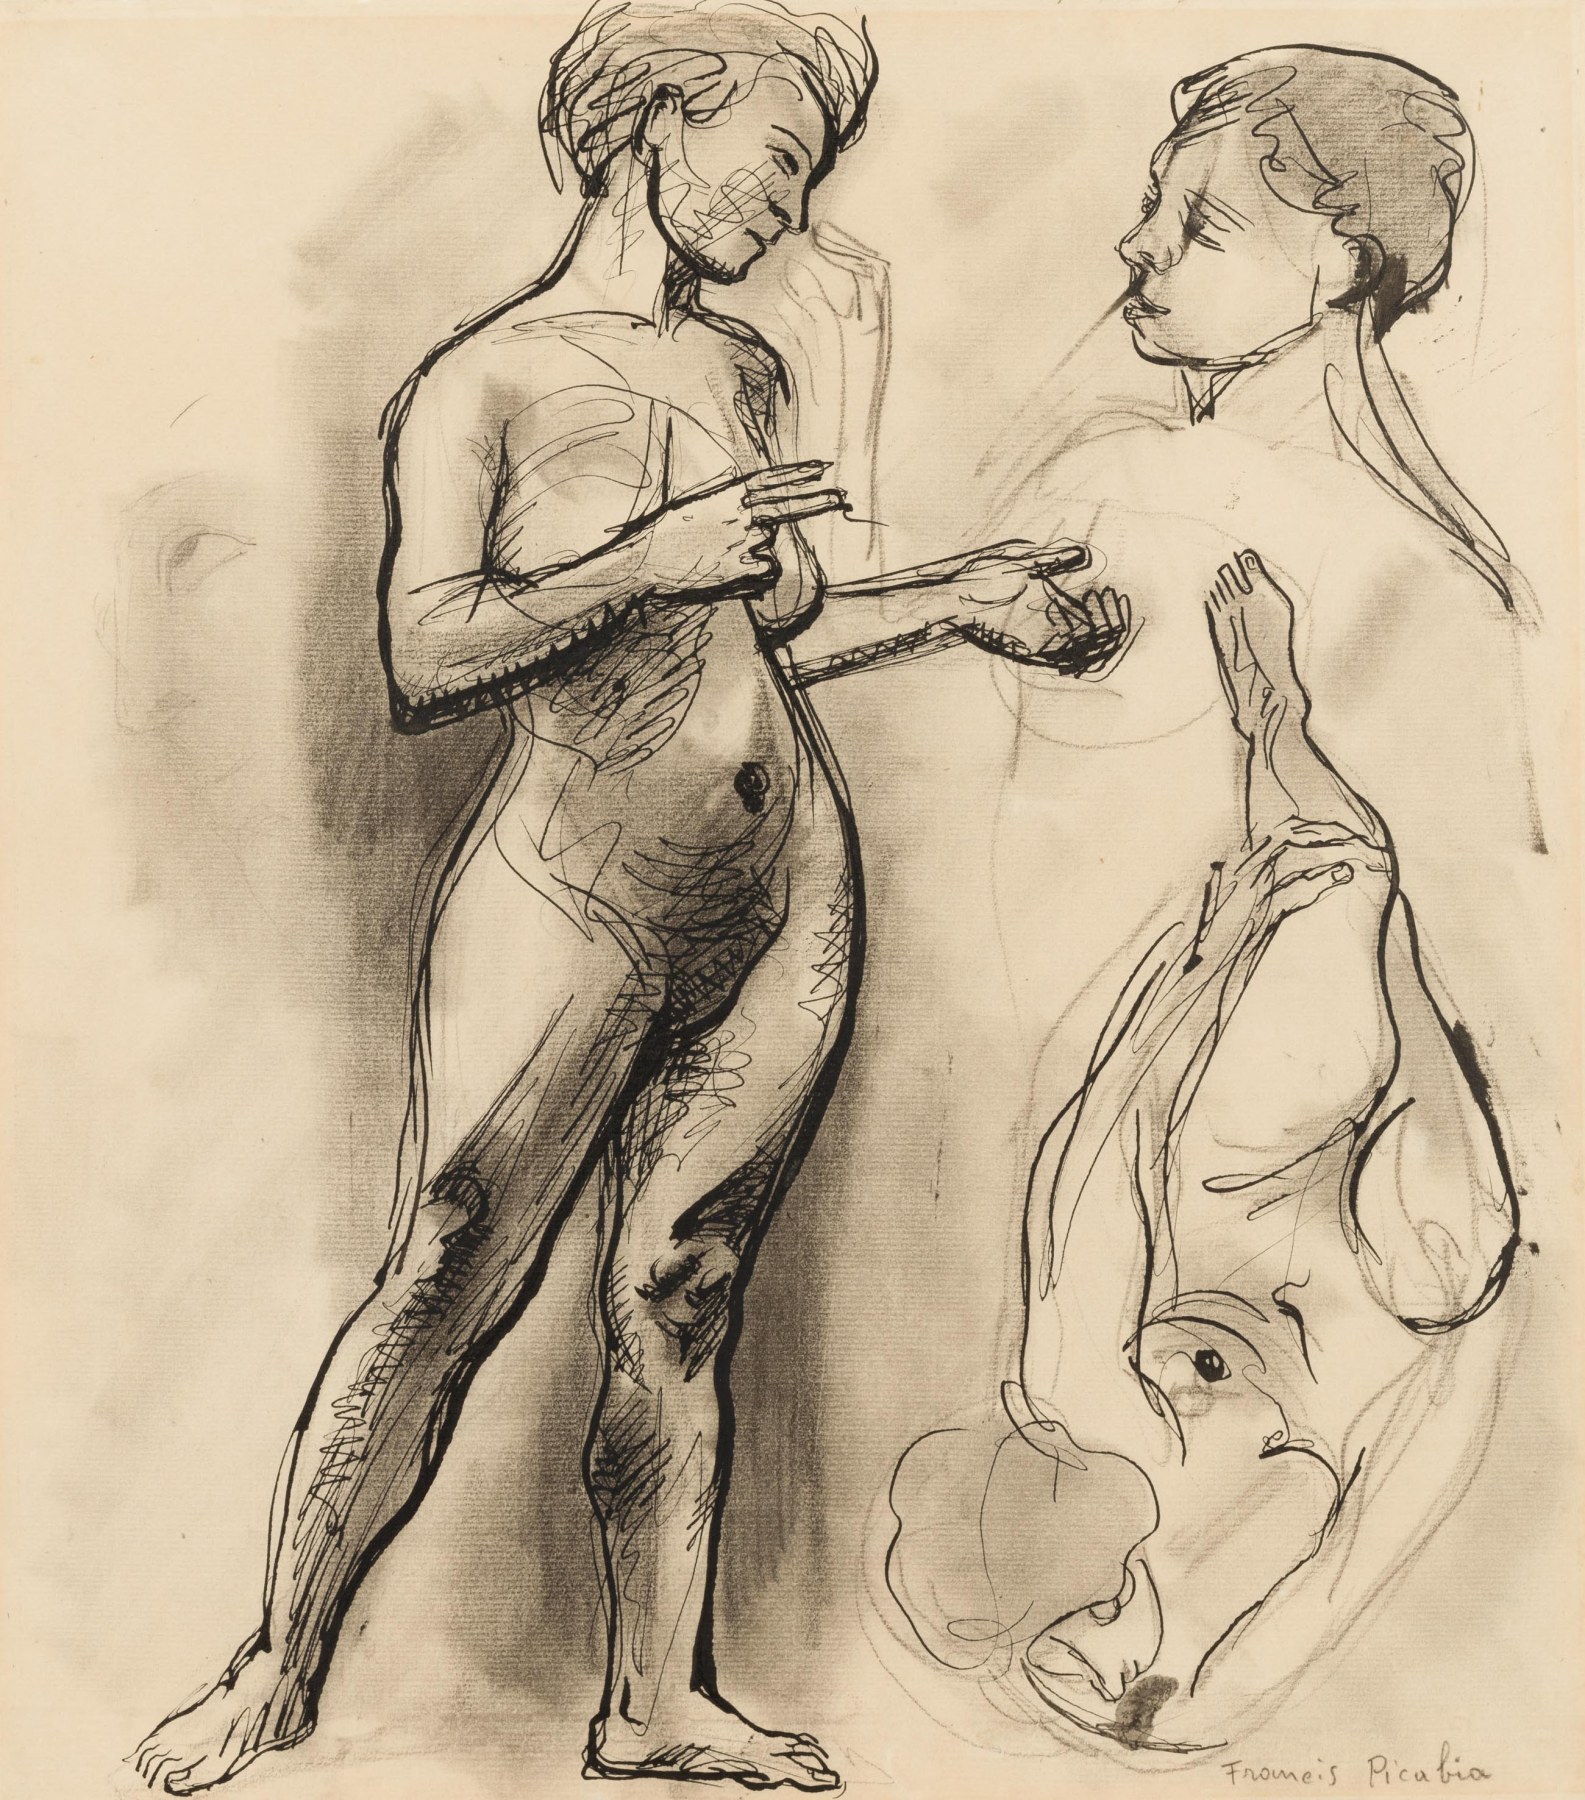 Francis Picabia

&amp;ldquo;Etude pour Transparence&amp;rdquo;, ca. 1932

Charcoal, ink, pencil on paper

14 x 12 1/4 inches

35.5 x 31.5 cm

PIZ 12